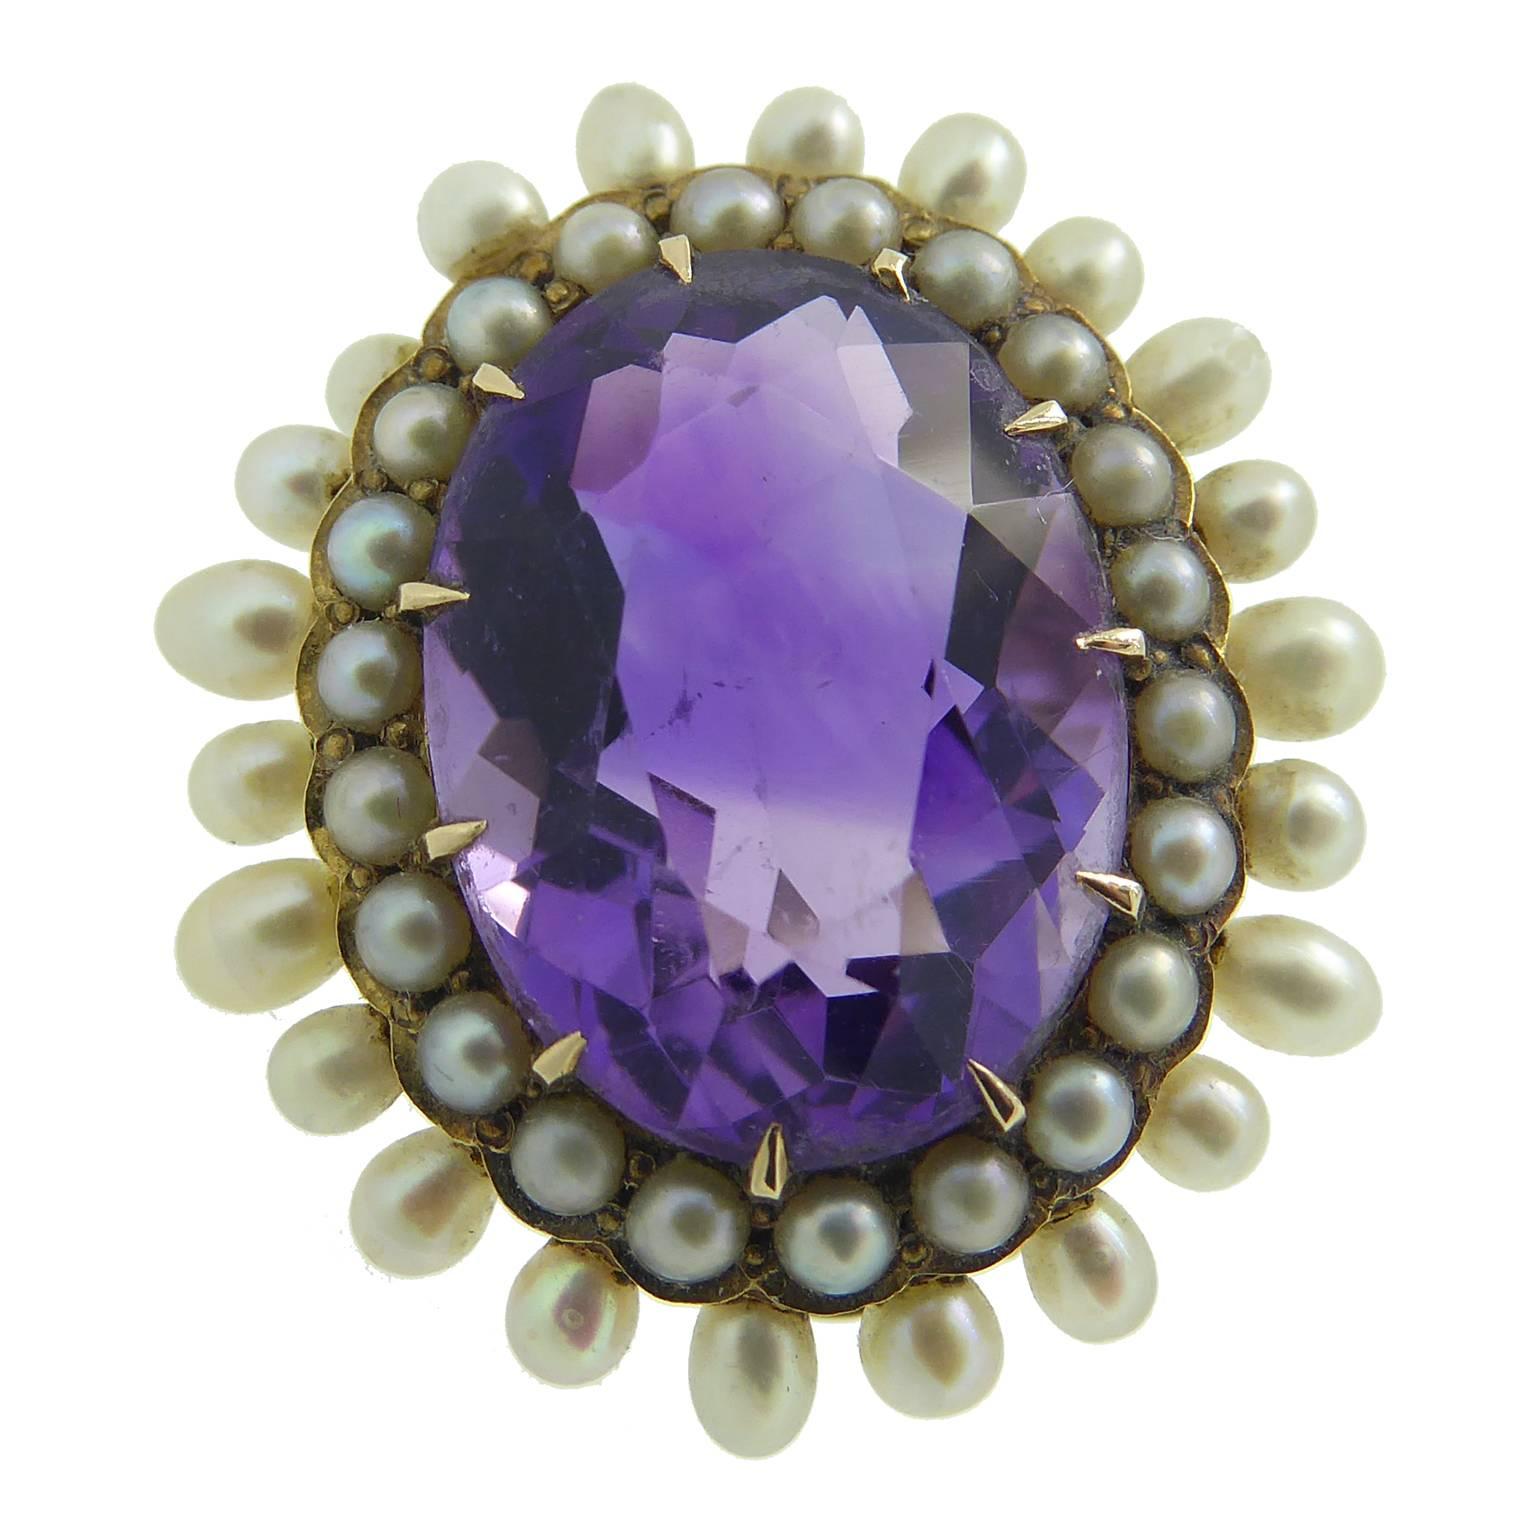 A lovely brooch, very dainty and set with a rich purple hued faceted amethyst, the colour of which is enhanced by the lustre of white pearls which surround it.  The amethyst is held in a setting of 10 yellow gold claws and enclosed within a surround